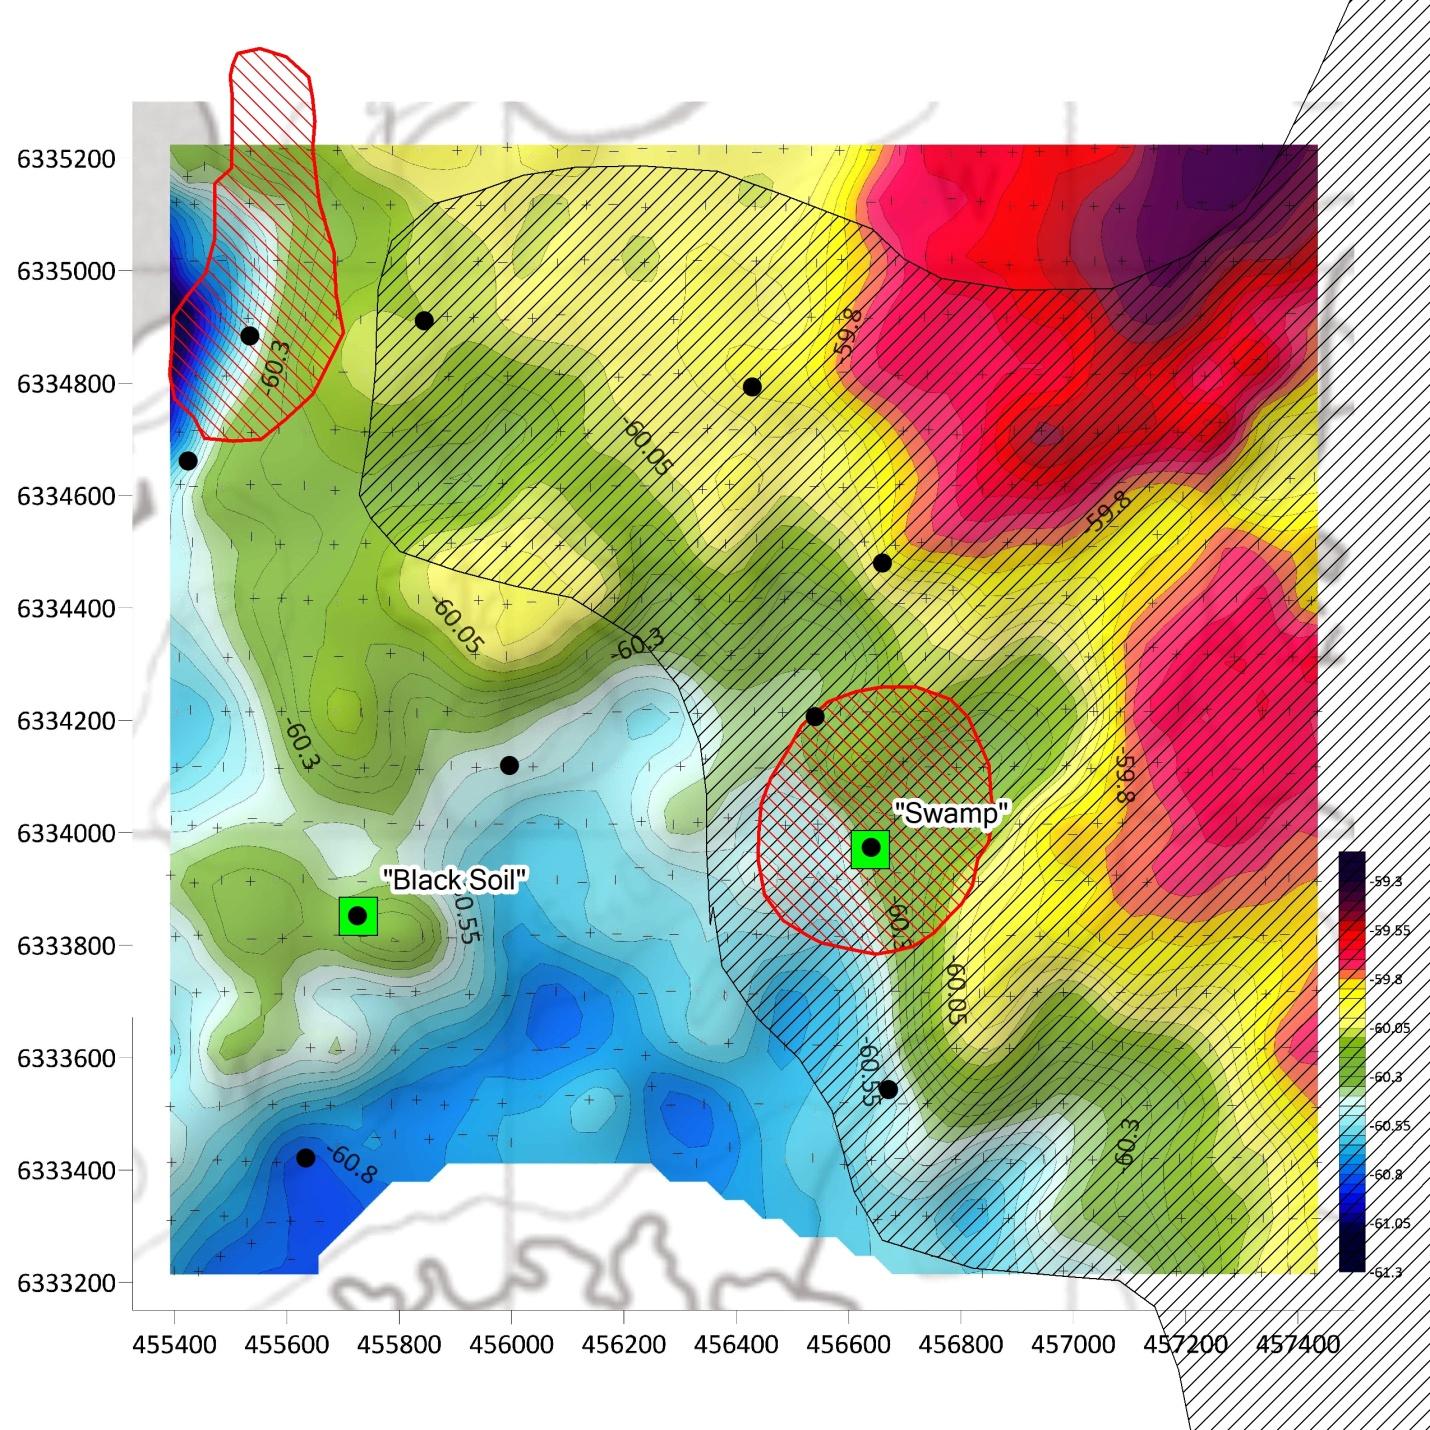 Colored map with black dots showing drill collars and anomalies in colors.